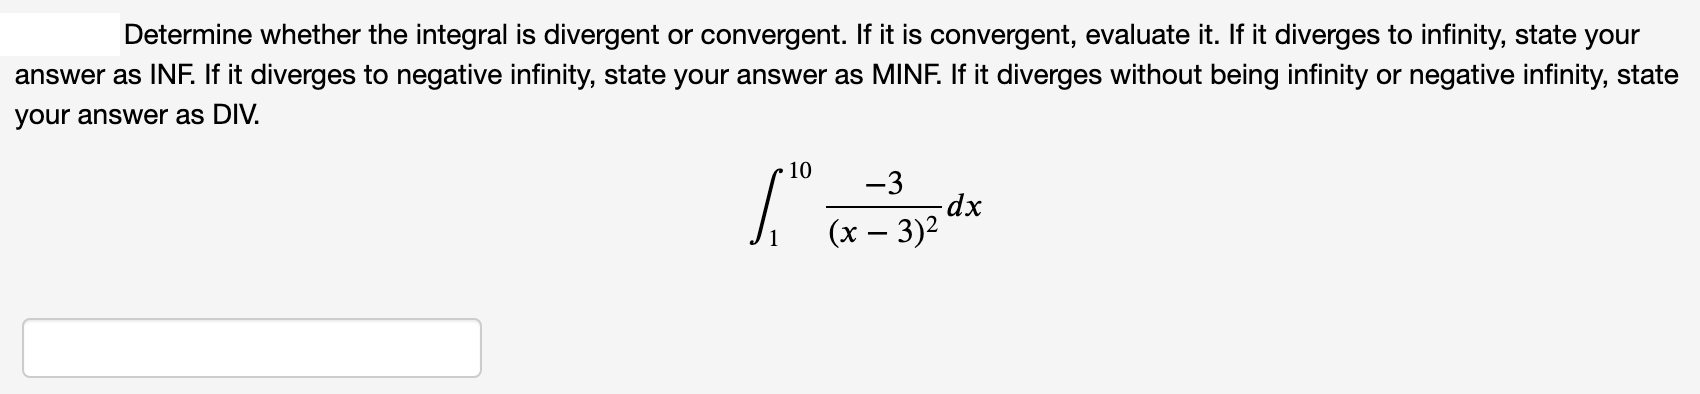 Determine whether the integral is divergent or convergent. If it is convergent, evaluate it. If it diverges to infinity, state your
answer as INF. If it diverges to negative infinity, state your answer as MINF. If it diverges without being infinity or negative infinity, state
your answer as DIV.
10
-3
dp-
(x – 3)2
|
